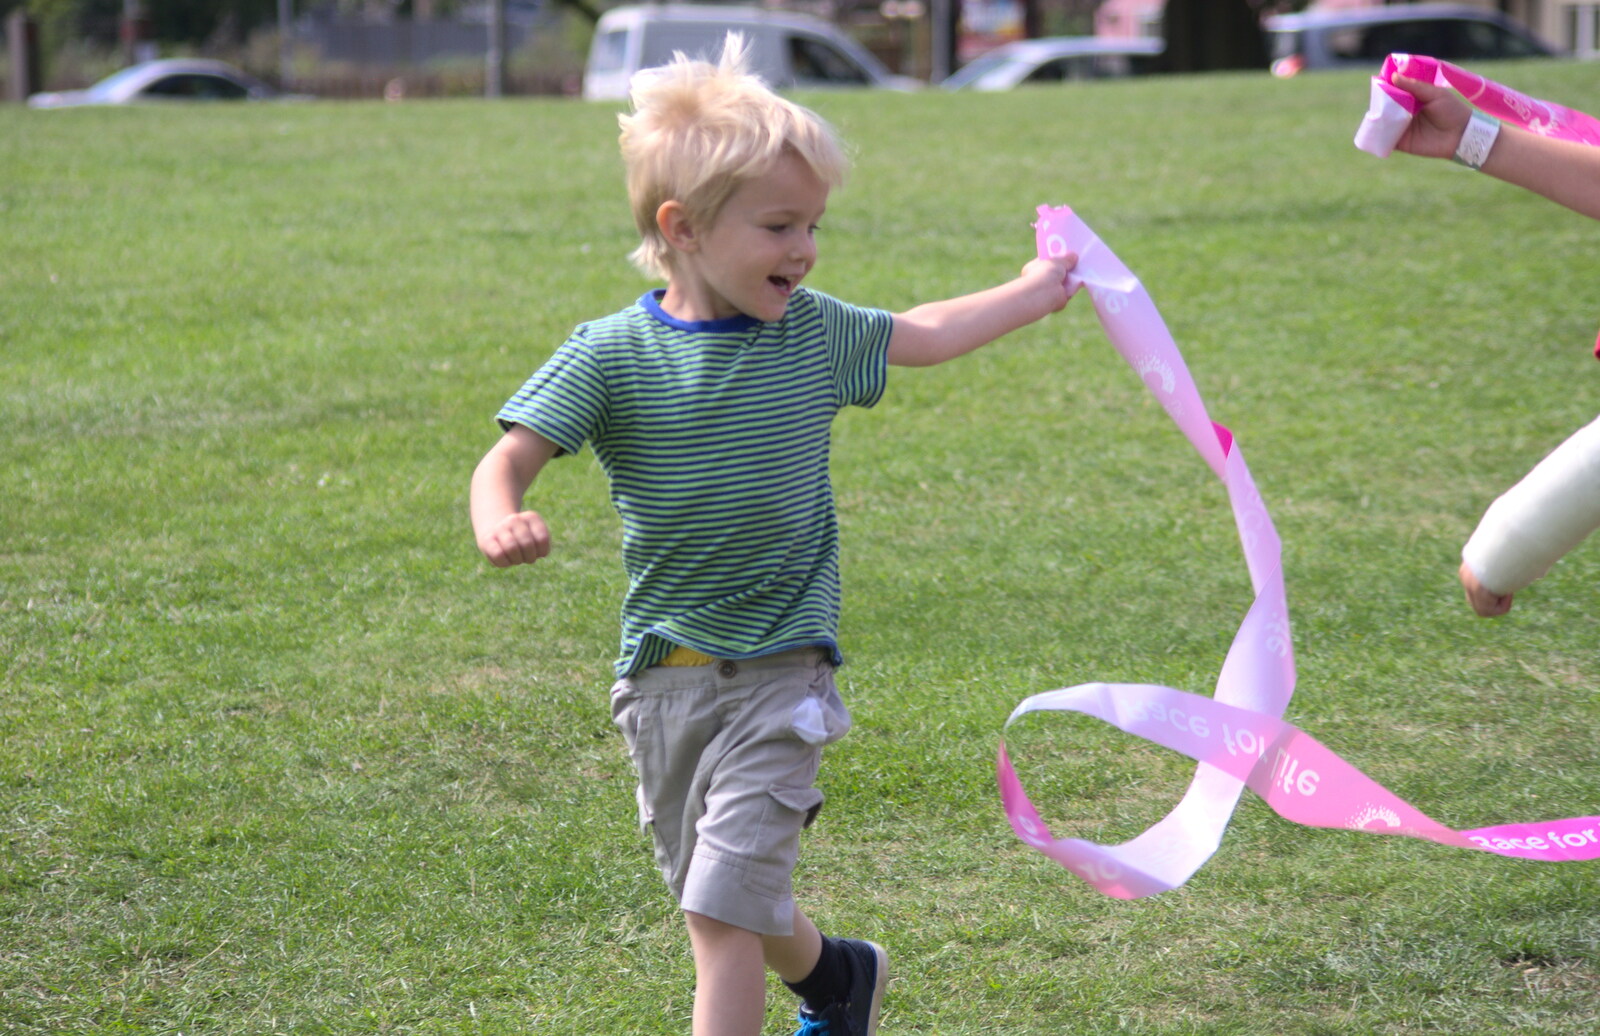 Harry runs around with the finishing tape from A Race For Life, The Park, Diss, Norfolk - 16th August 2015